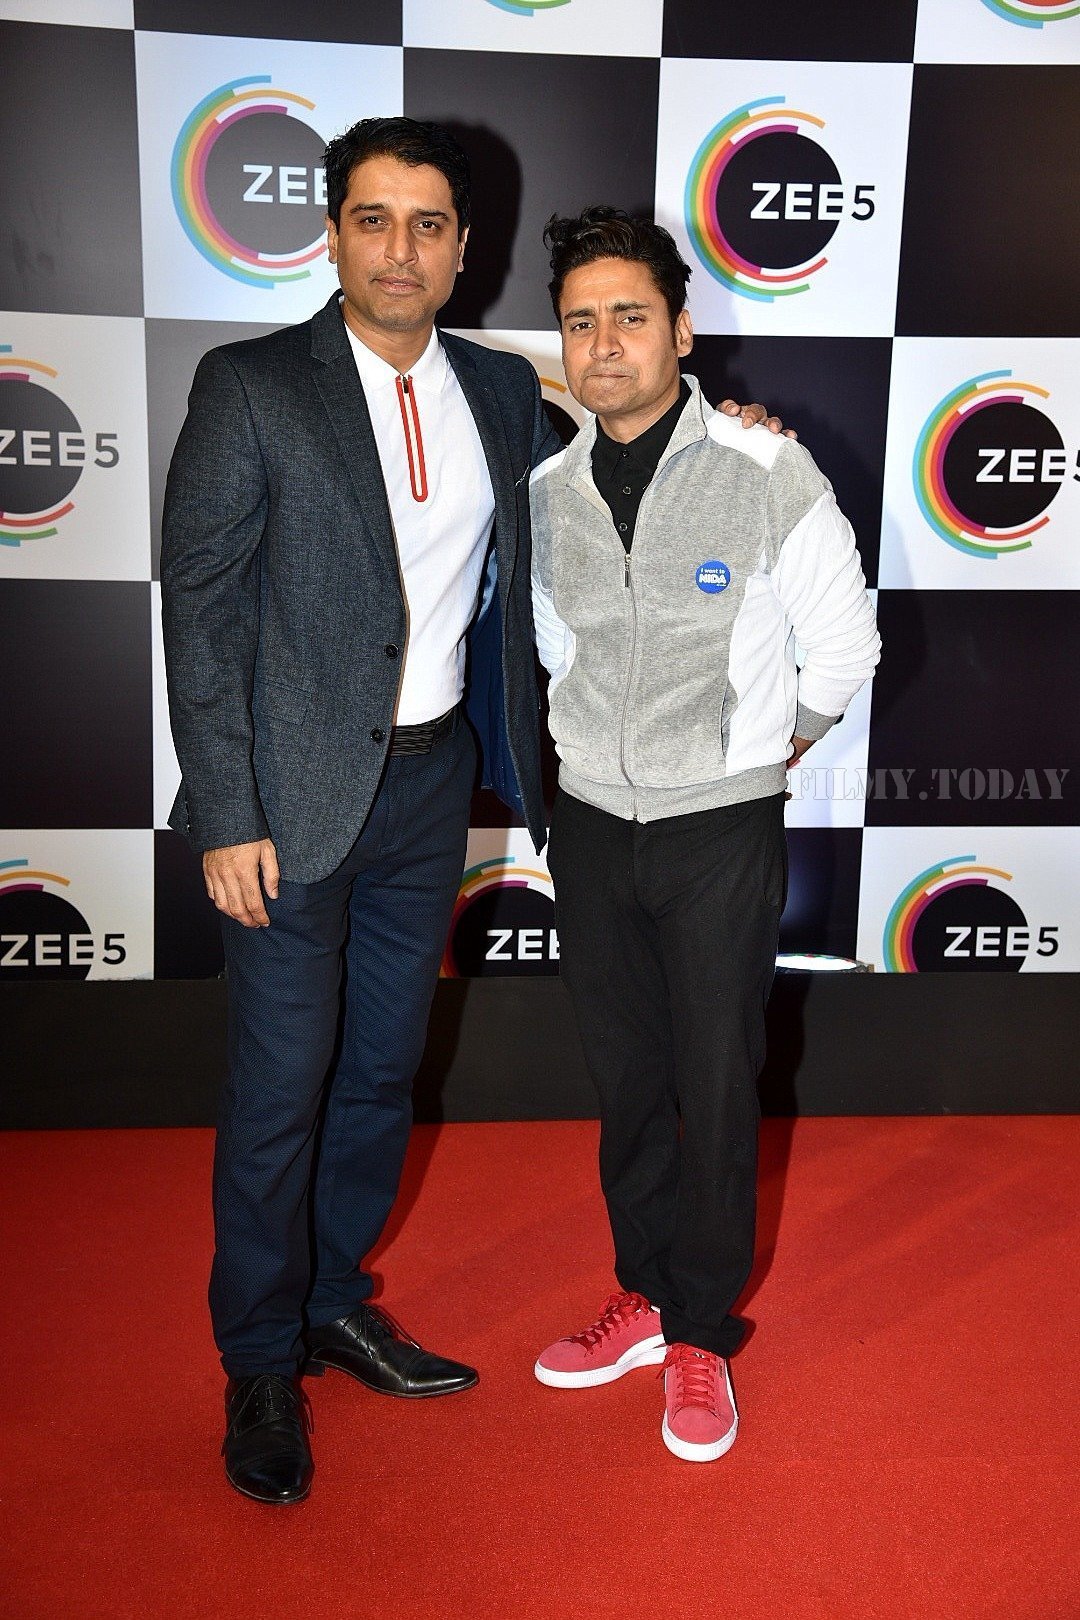 Photos: Red Carpet Of 1 Year Anniversary Of Zee5 App | Picture 1627519